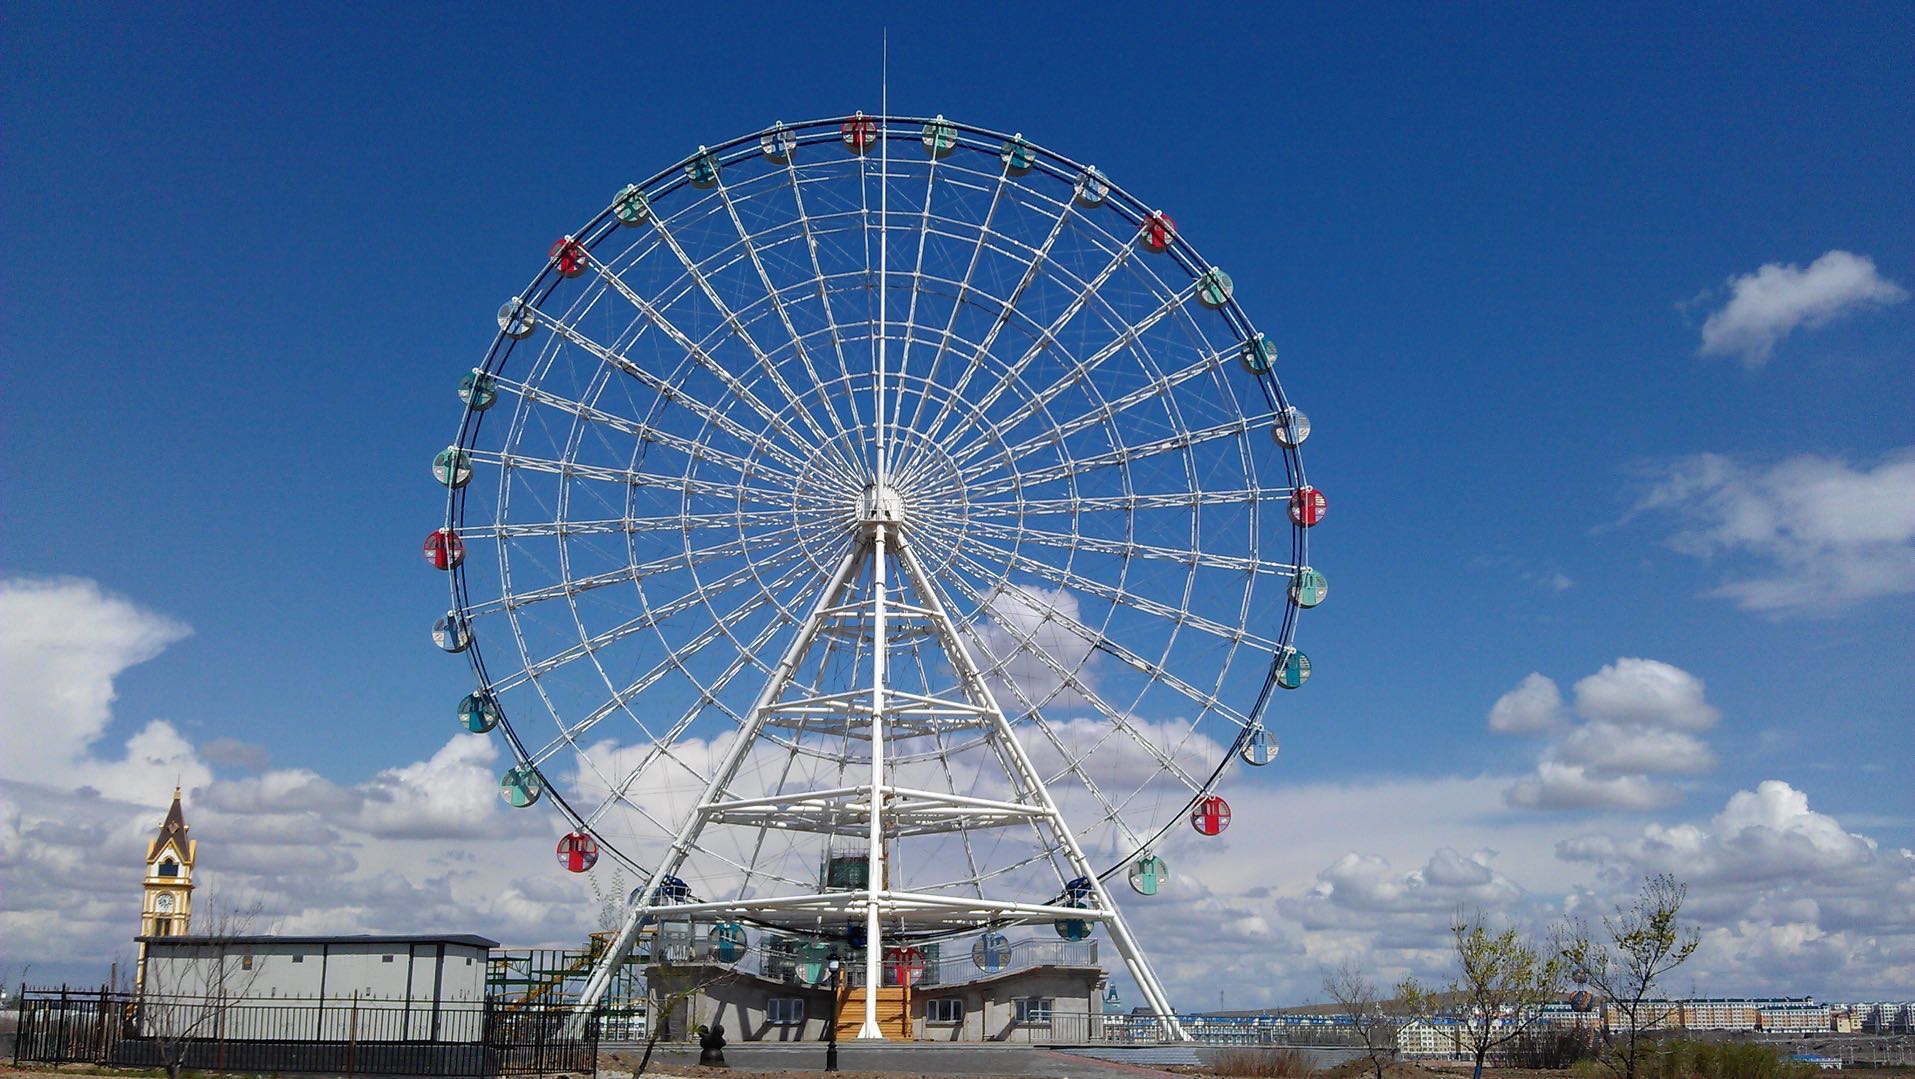 Guangzhou Shunhong (Sunhong) is a manufacturer of amusement rides with 20 years of experience.